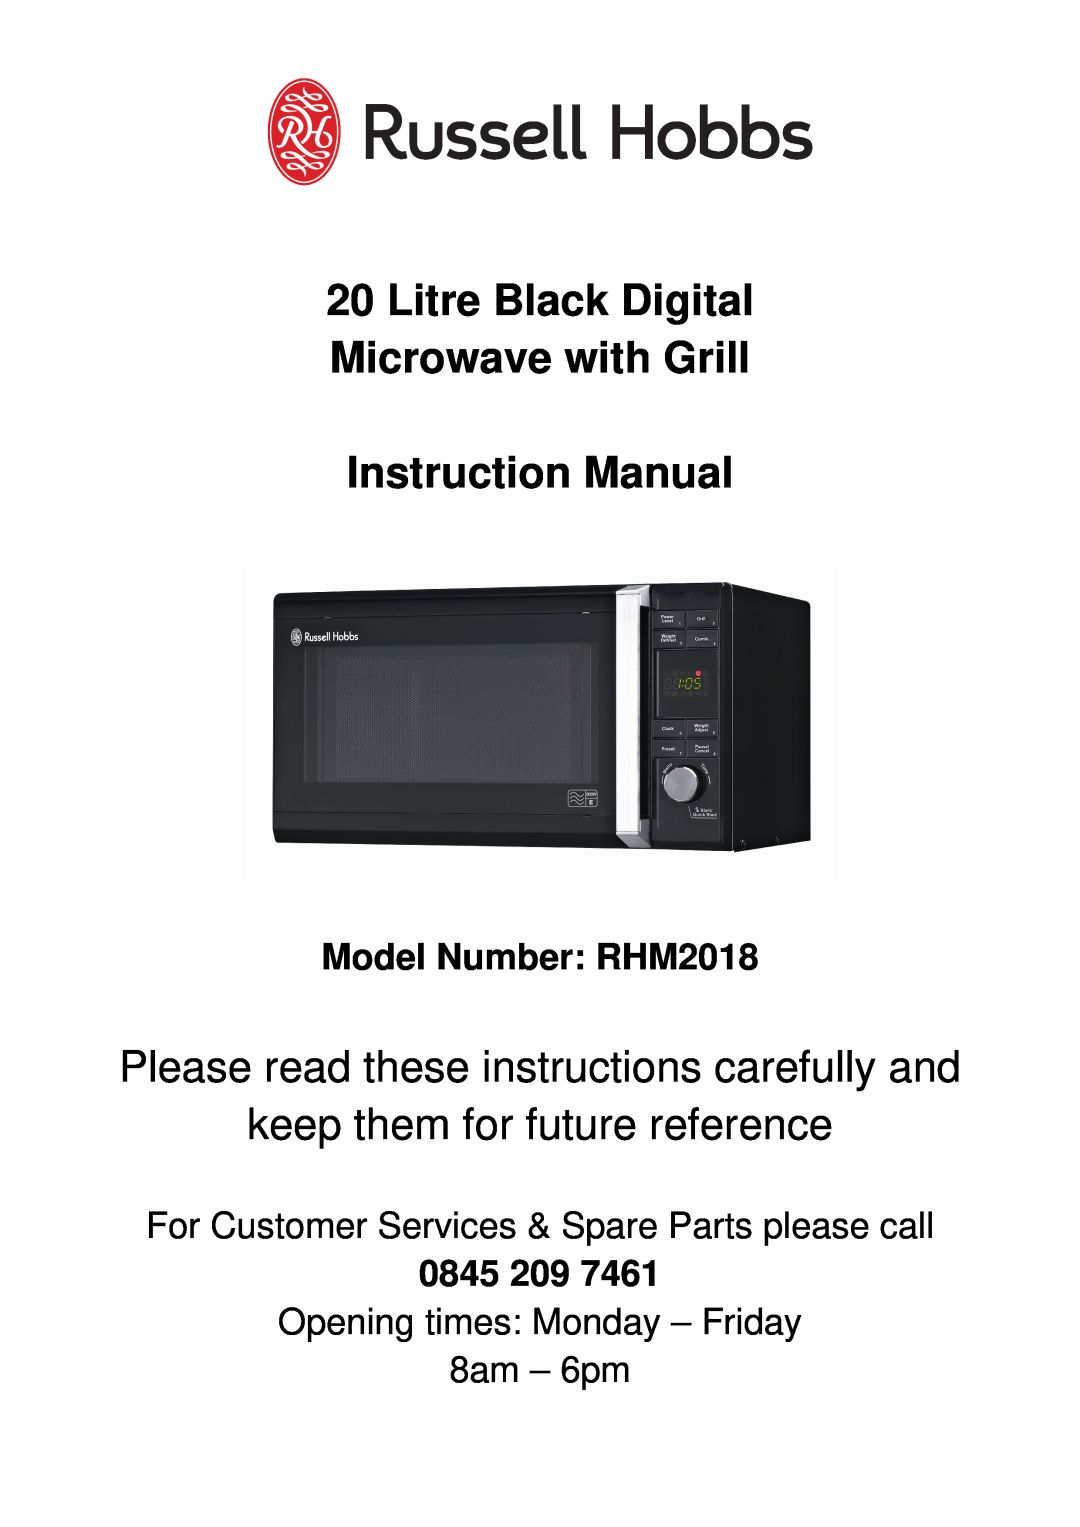 Russell Hobbs RHM2018 instruction manual Please read these instructions carefully and, keep them for future reference 